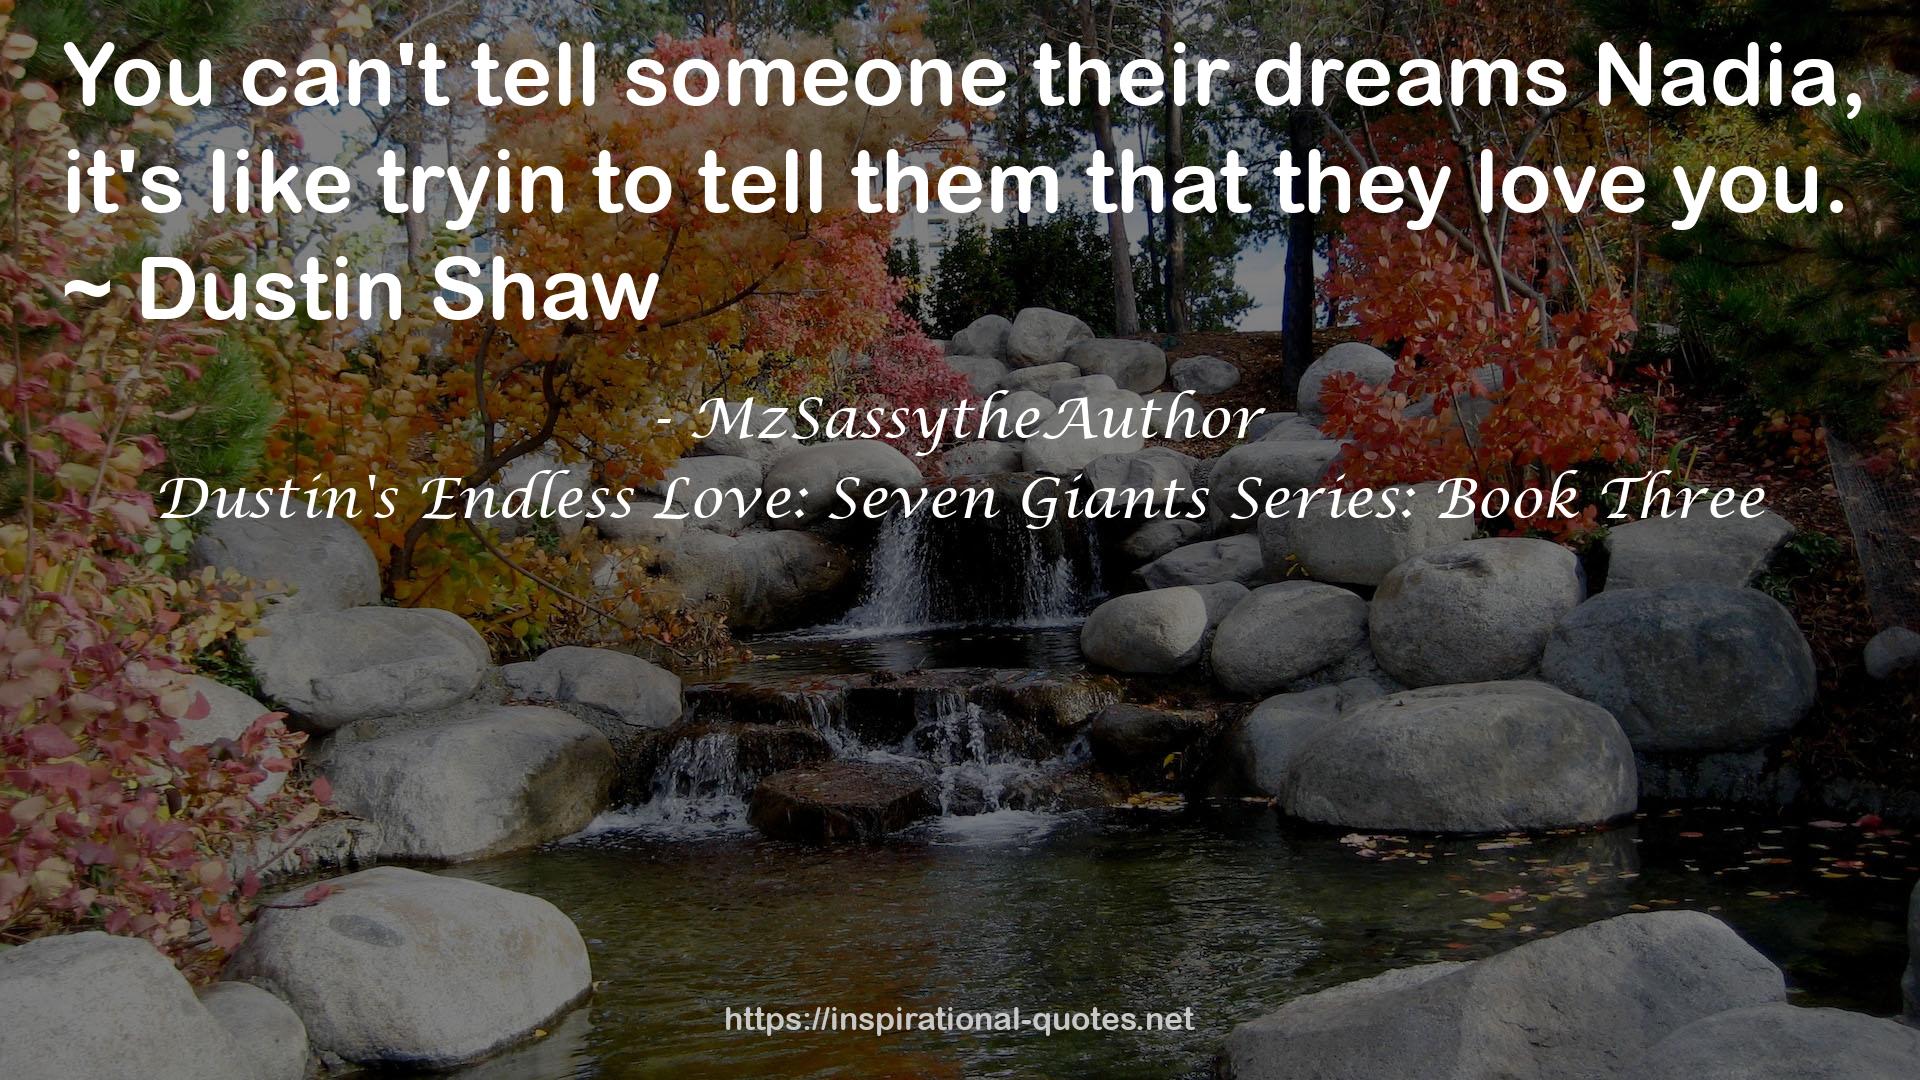 Dustin's Endless Love: Seven Giants Series: Book Three QUOTES